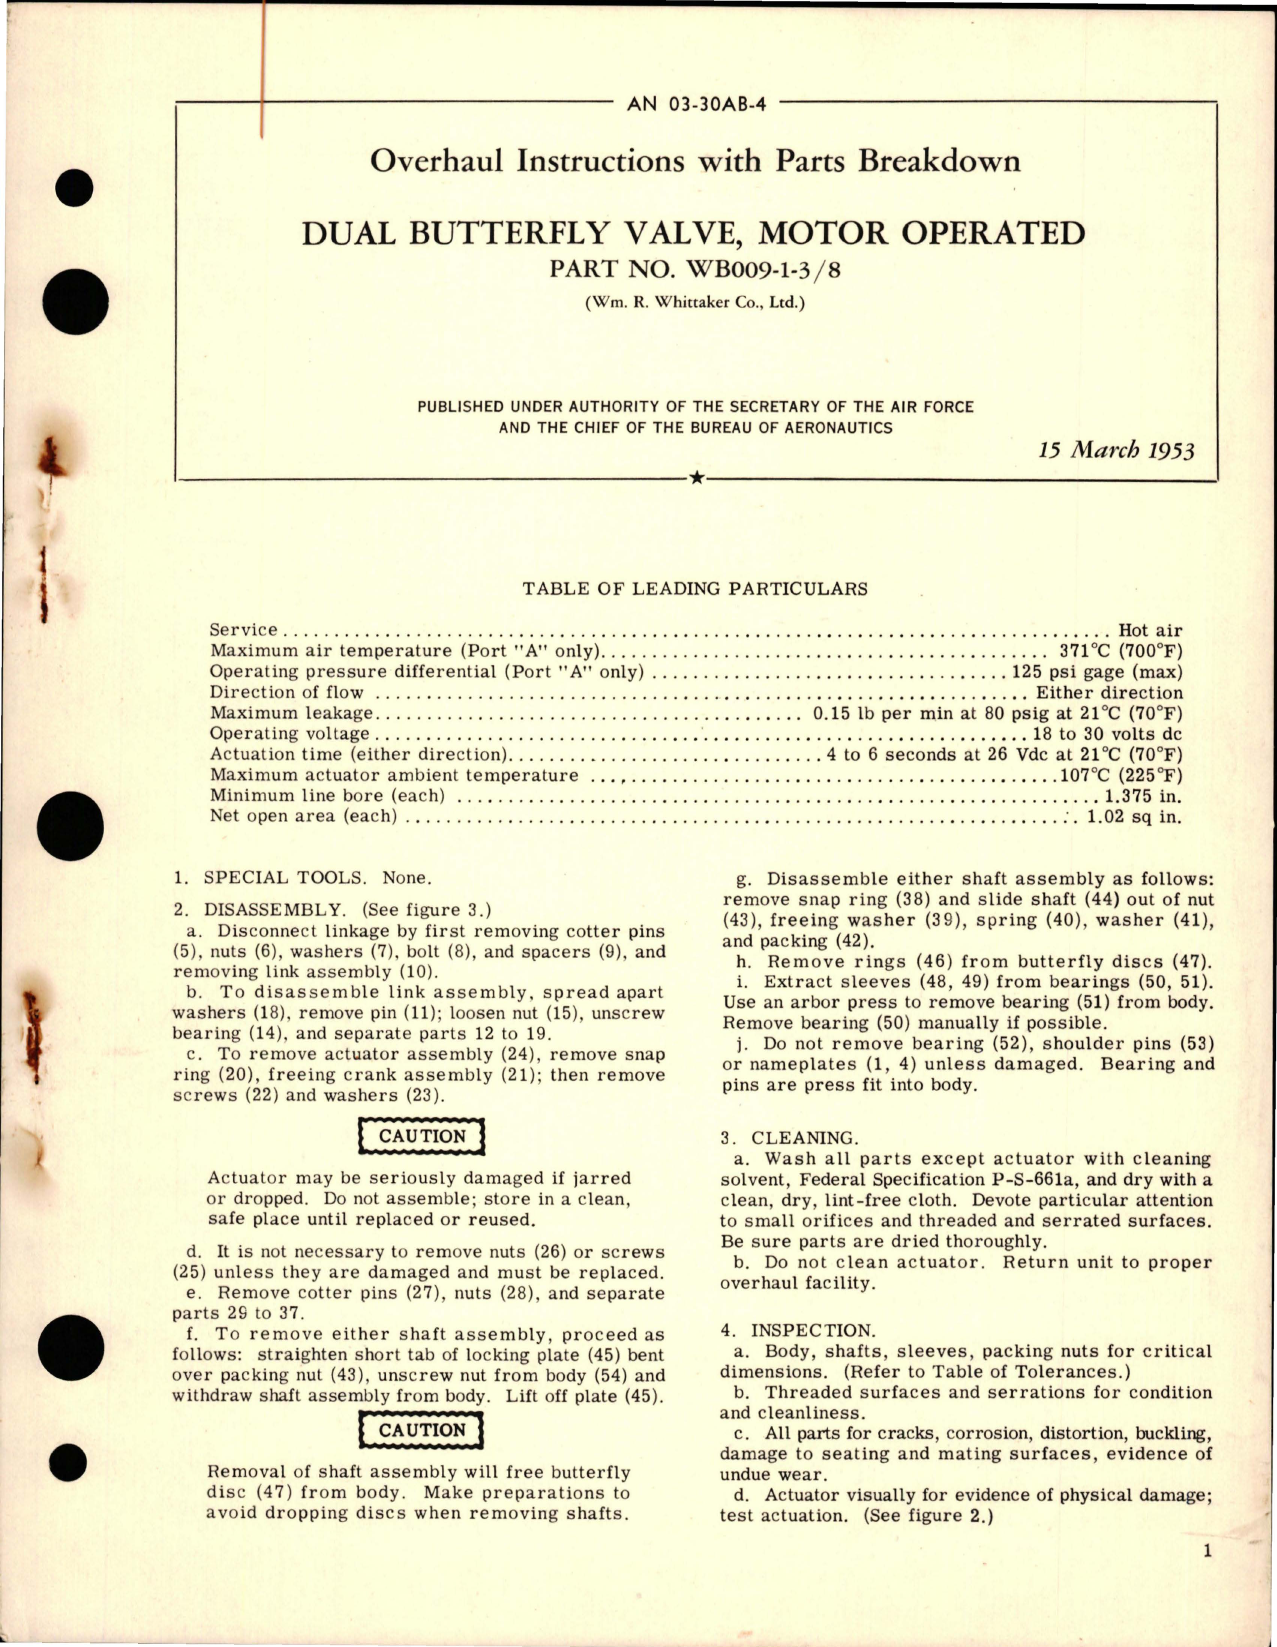 Sample page 1 from AirCorps Library document: Overhaul Instructions with Parts Breakdown for Motor Operated Dual Butterfly Valve - Parts WB009-1-3/8